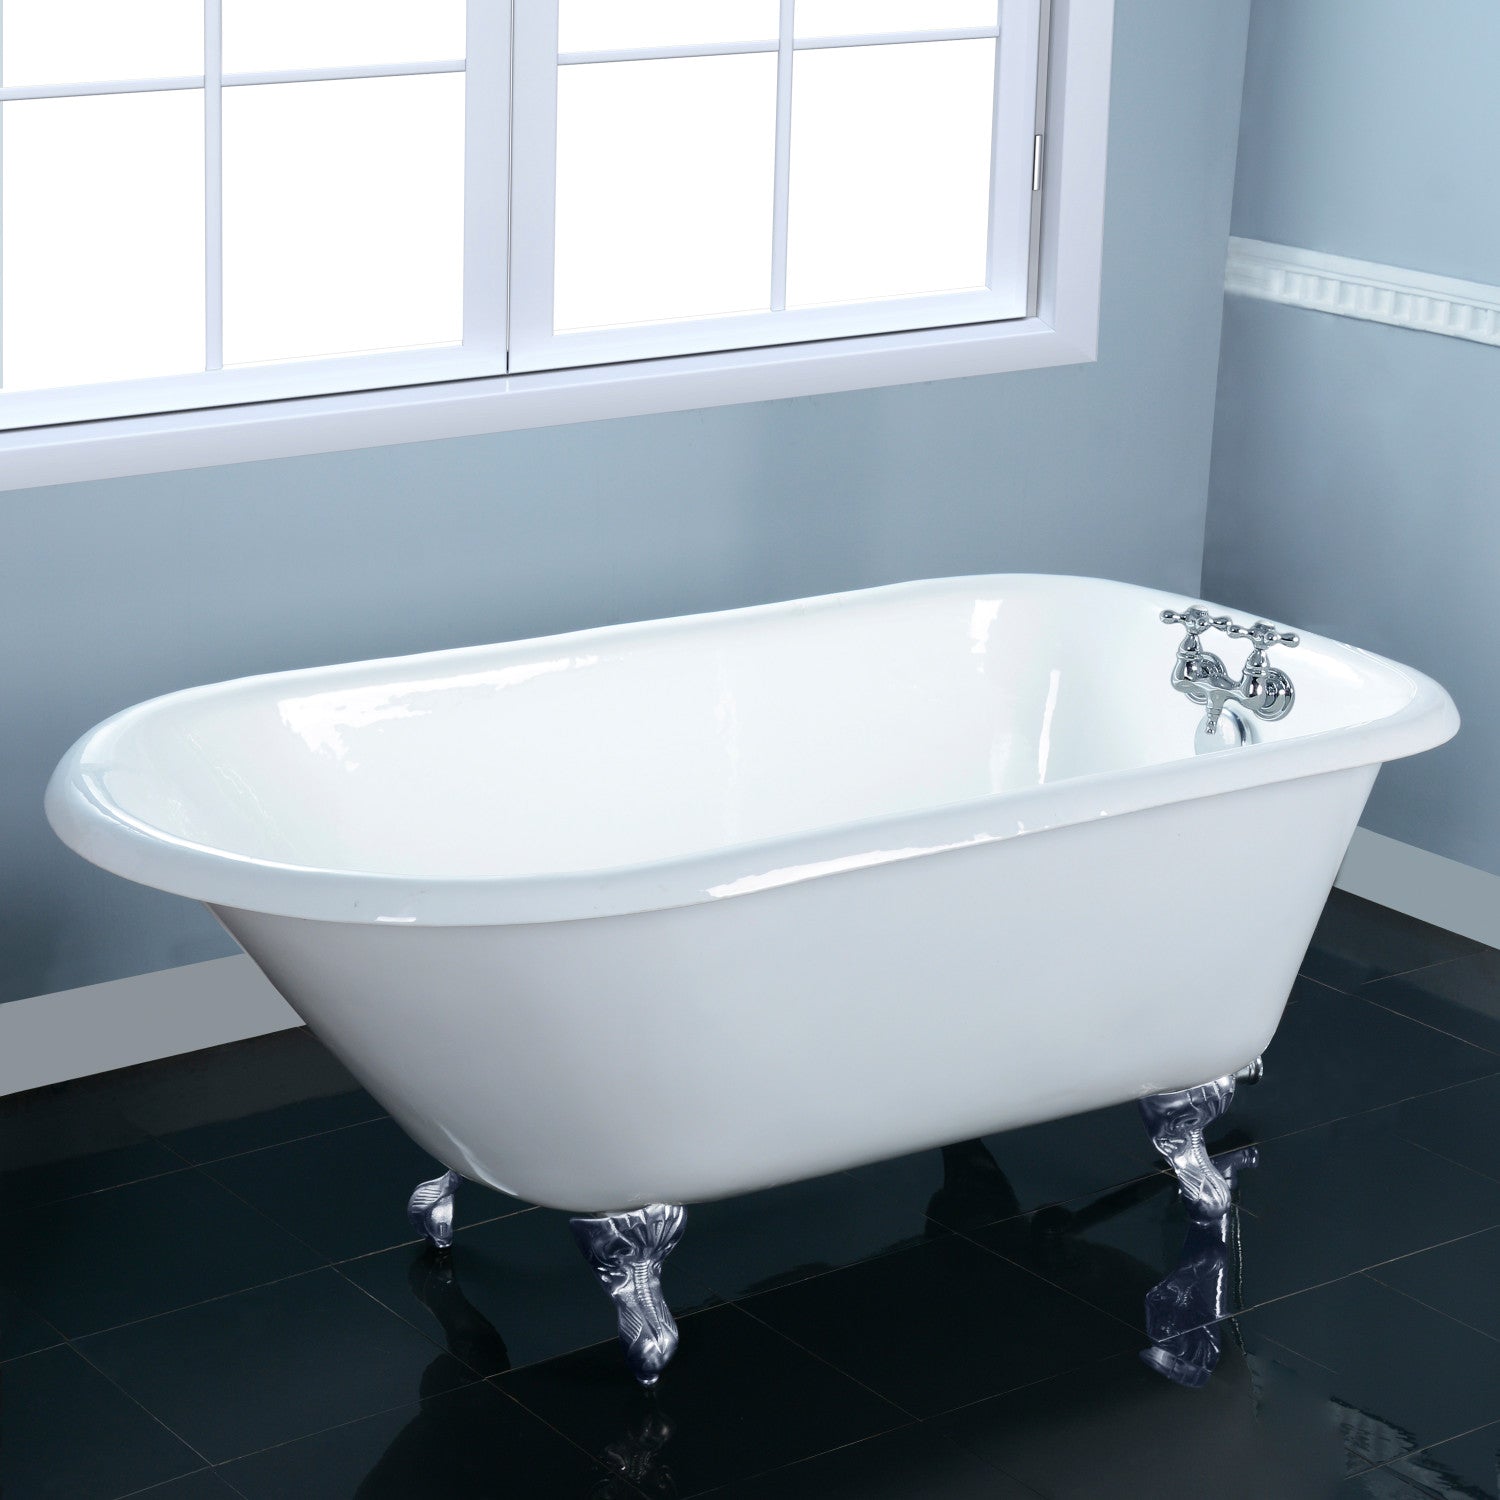 Kingston Brass Aqua Eden Roll VCT3D663019NT1 Clawfoot Tub Top Iron with Cast 66-Inch